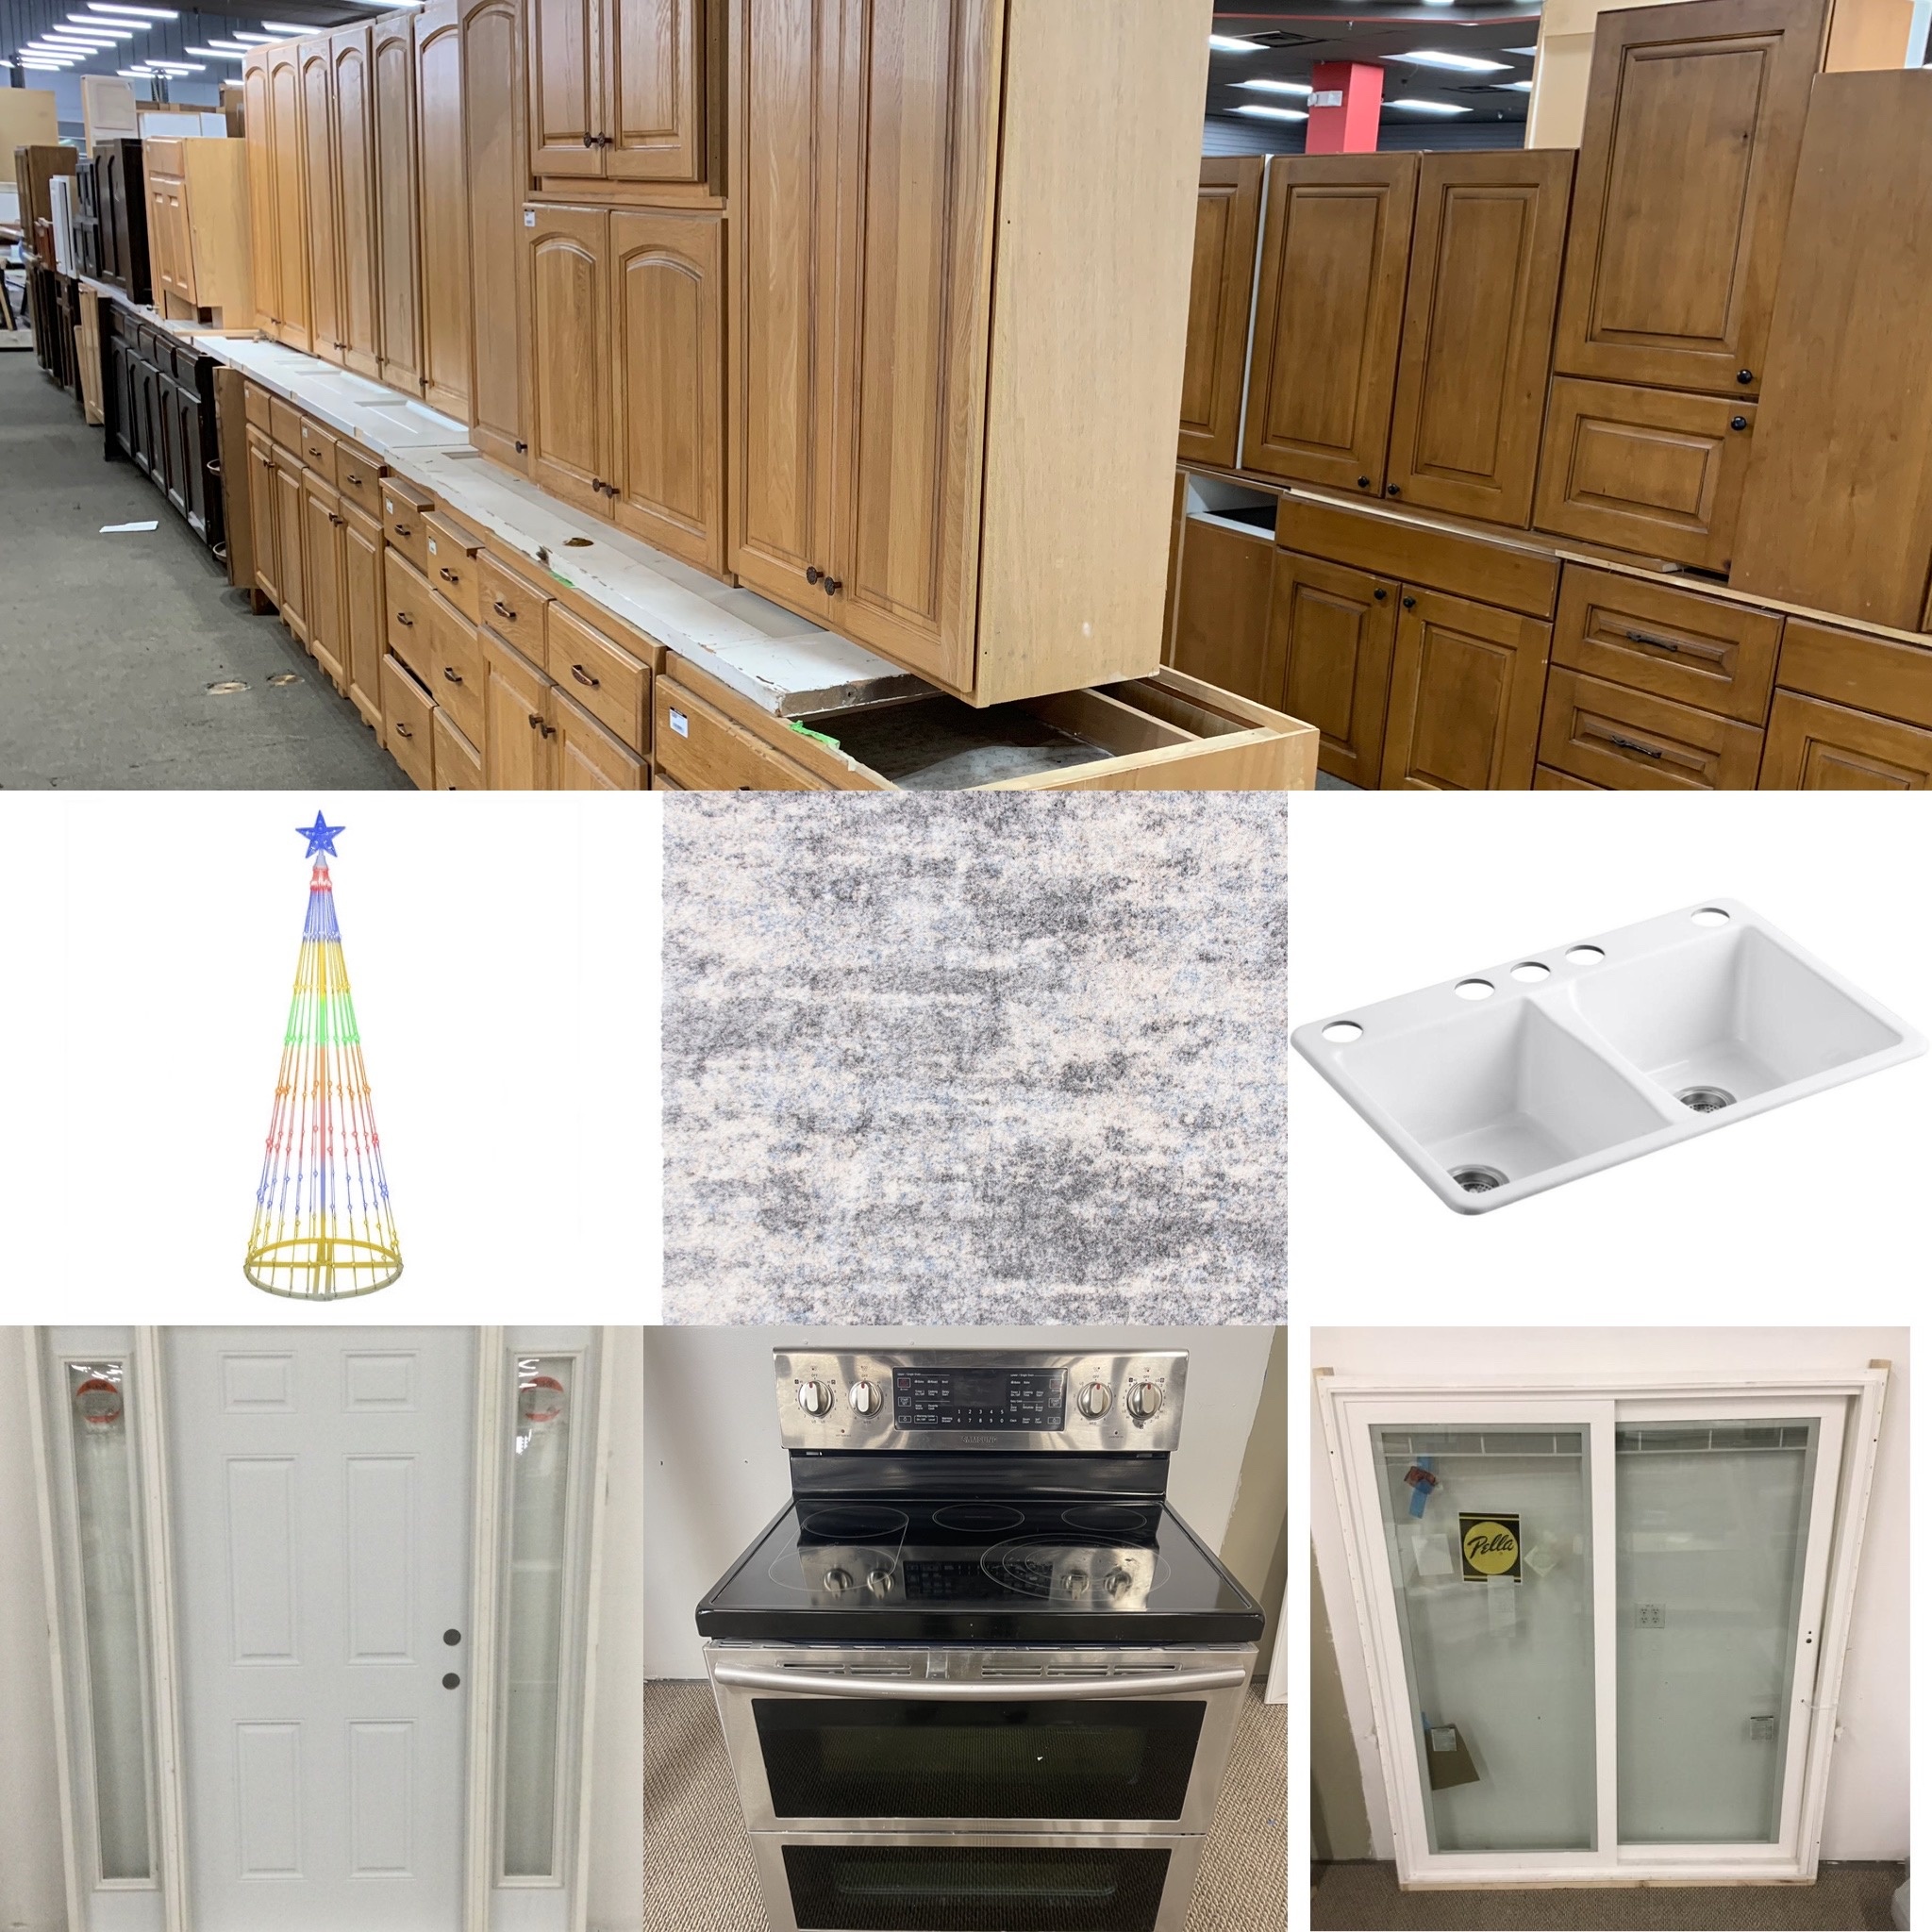 Bud's has just about everything for your home and the kitchen sink! 